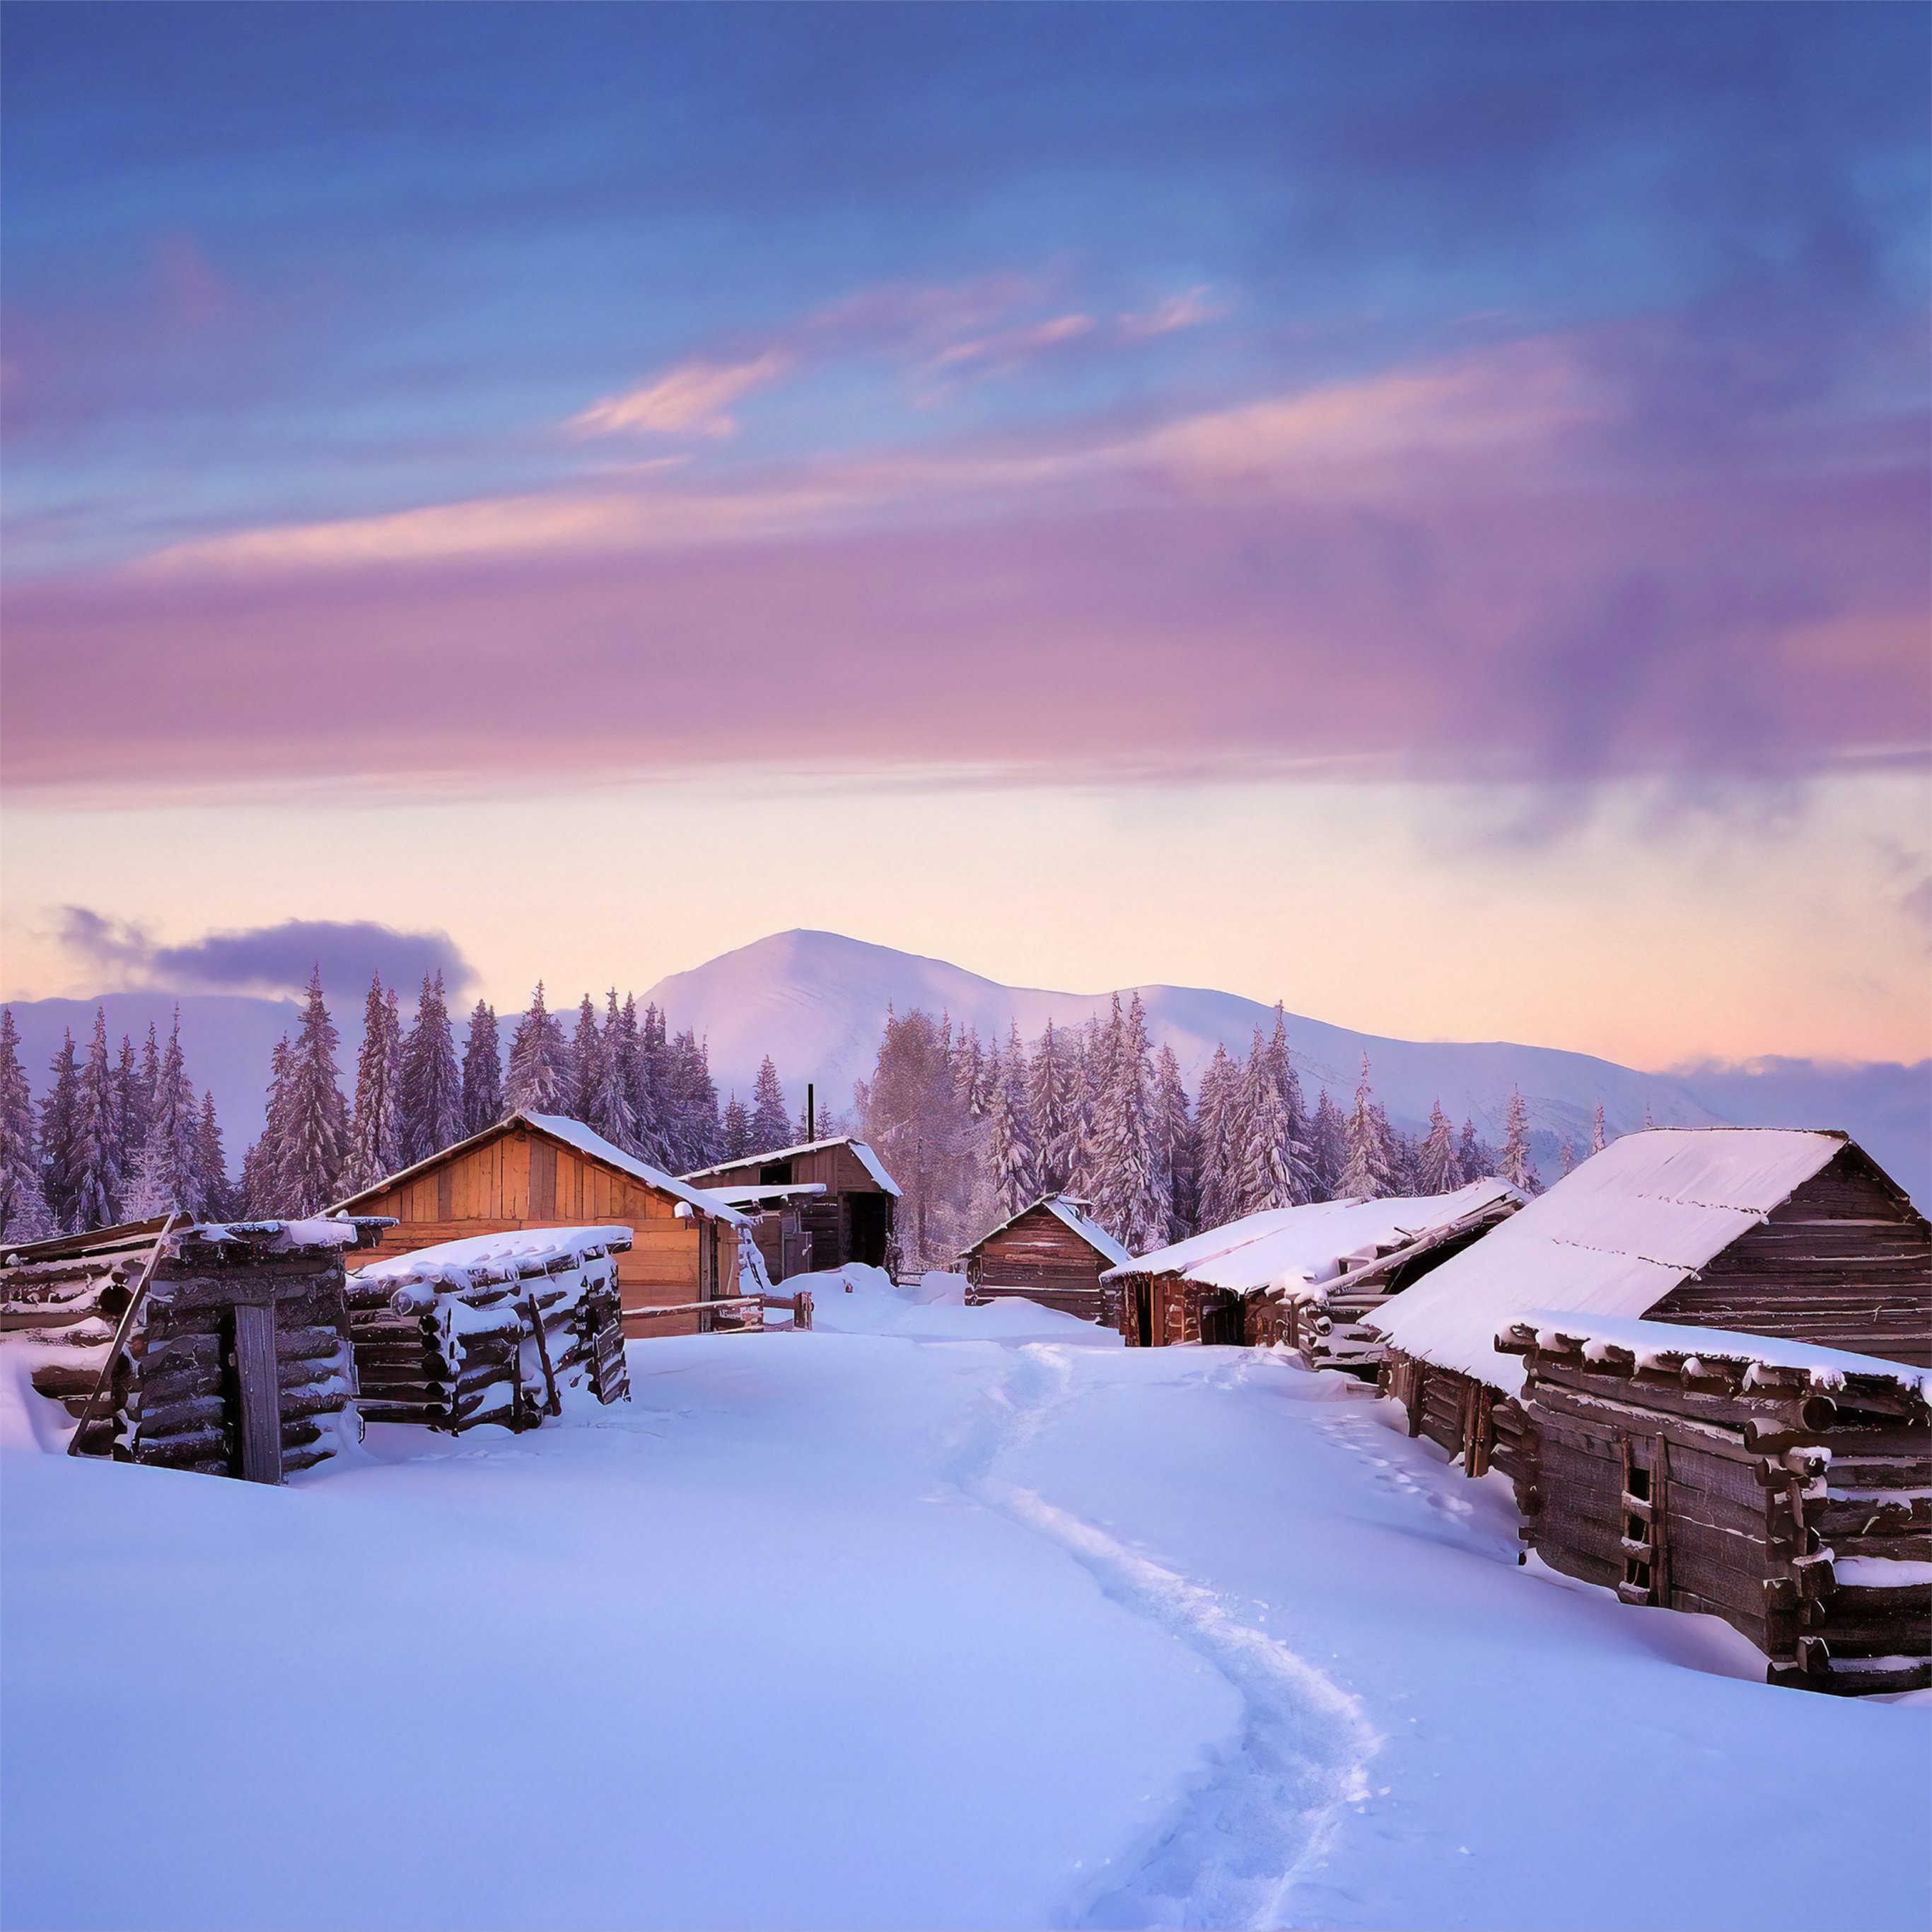 huts covered in snow 4k iPad Wallpaper Free Download